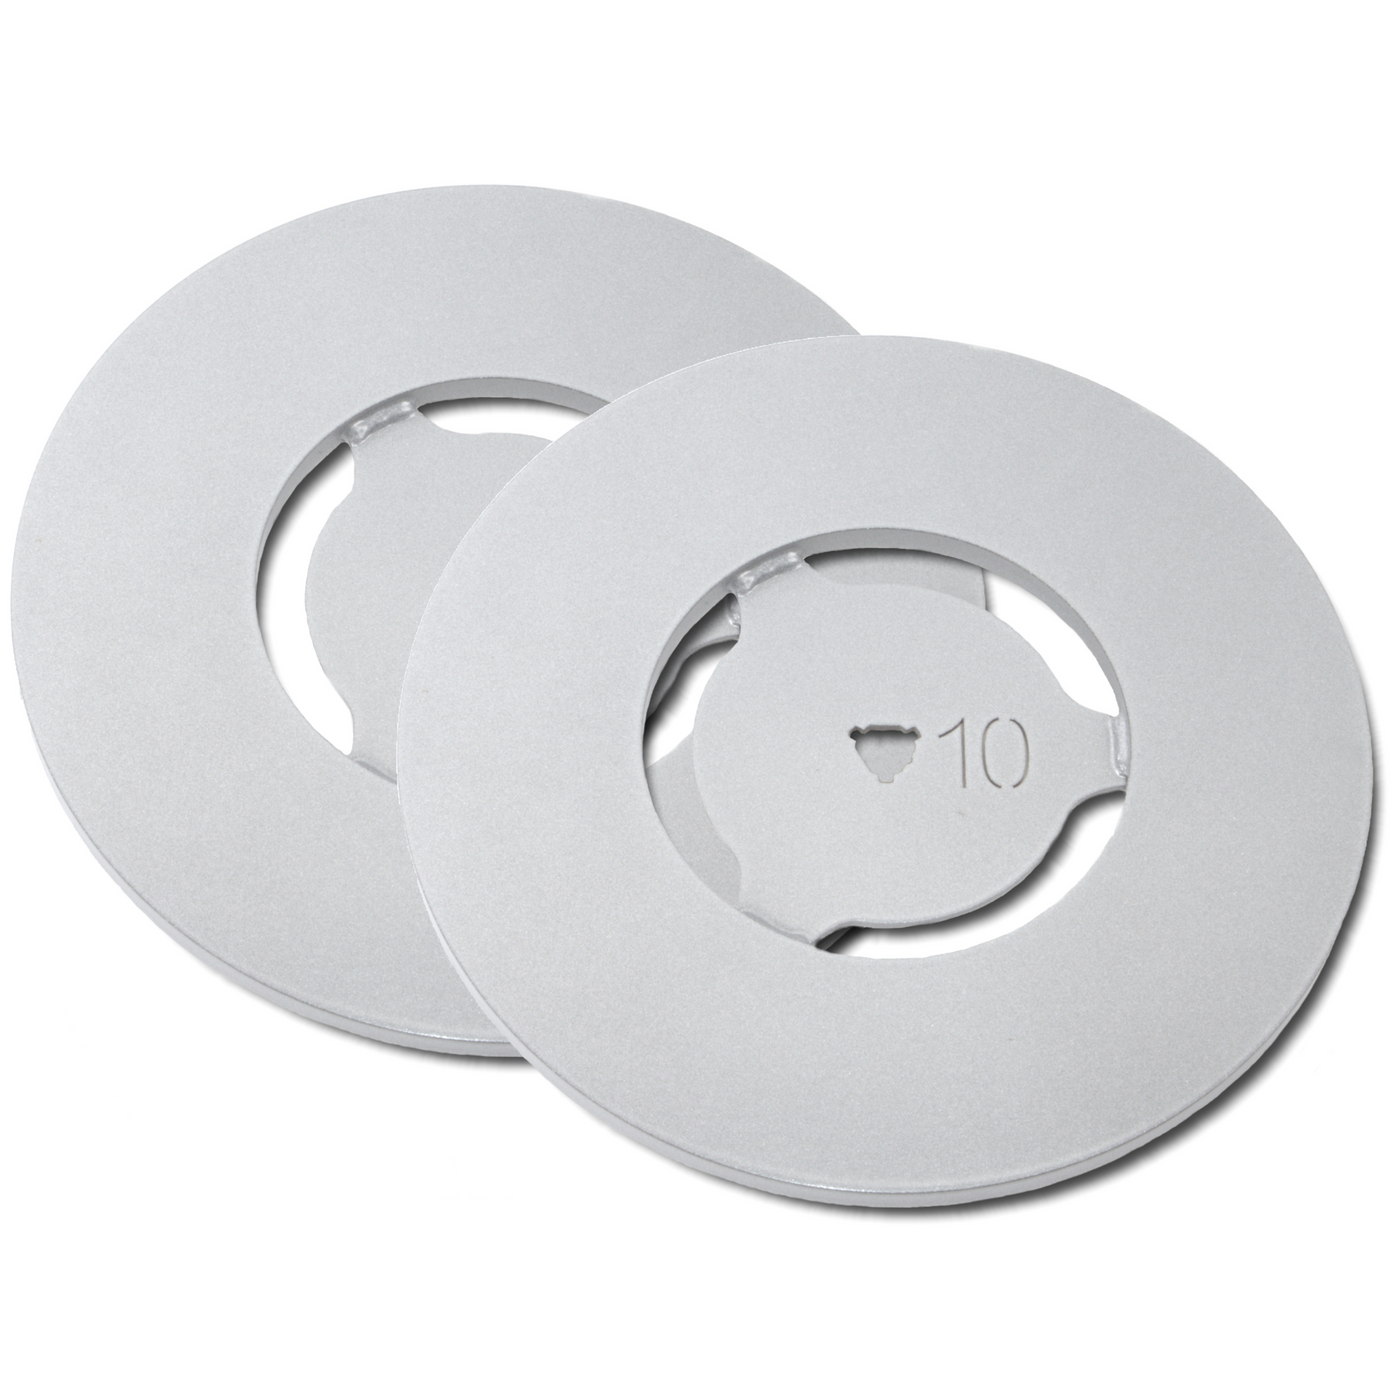 Disc Set 10 mm (Not compatible in Kynett HOME & ONE!)